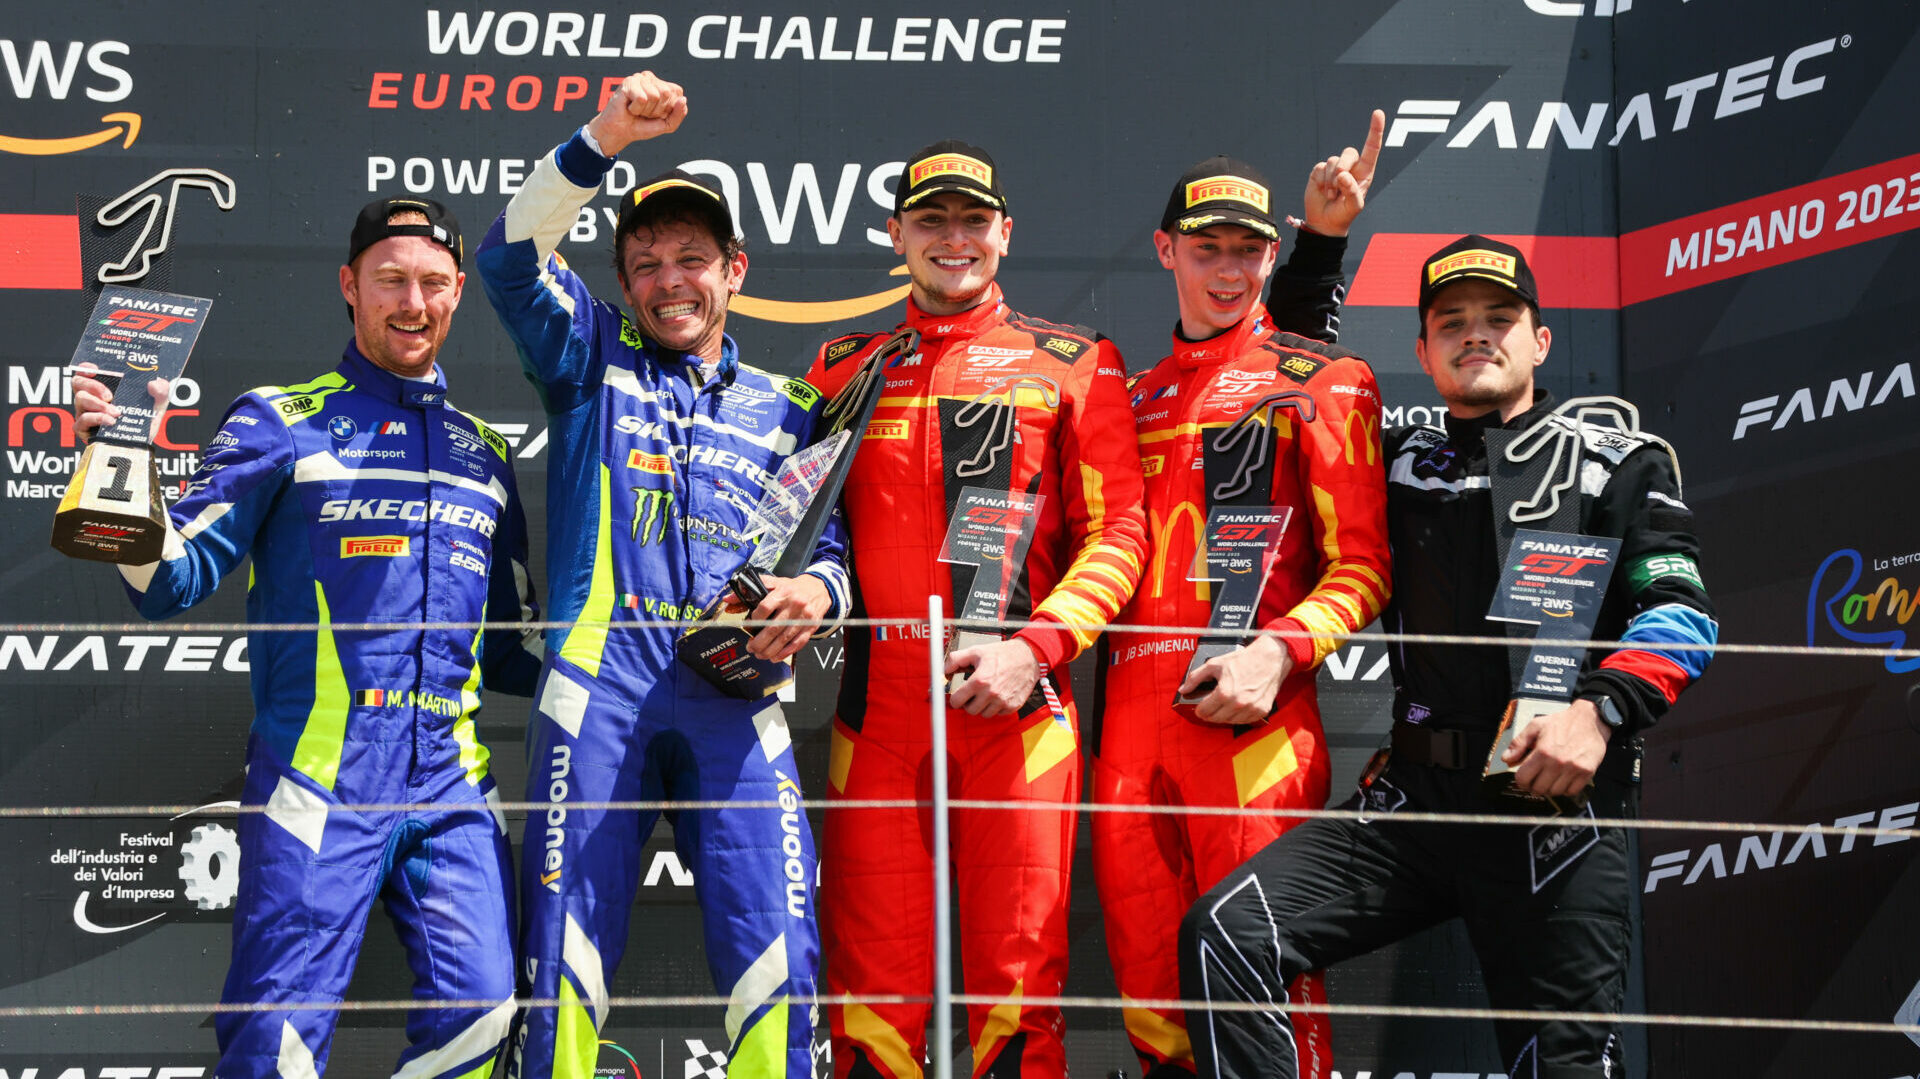 Valentino Rossi (second from left) and his teammate Maxime Martin (far left) won the Fanatec GT World Challenge Europe Sprint Cup race at Misano. Photo courtesy Team WRT.